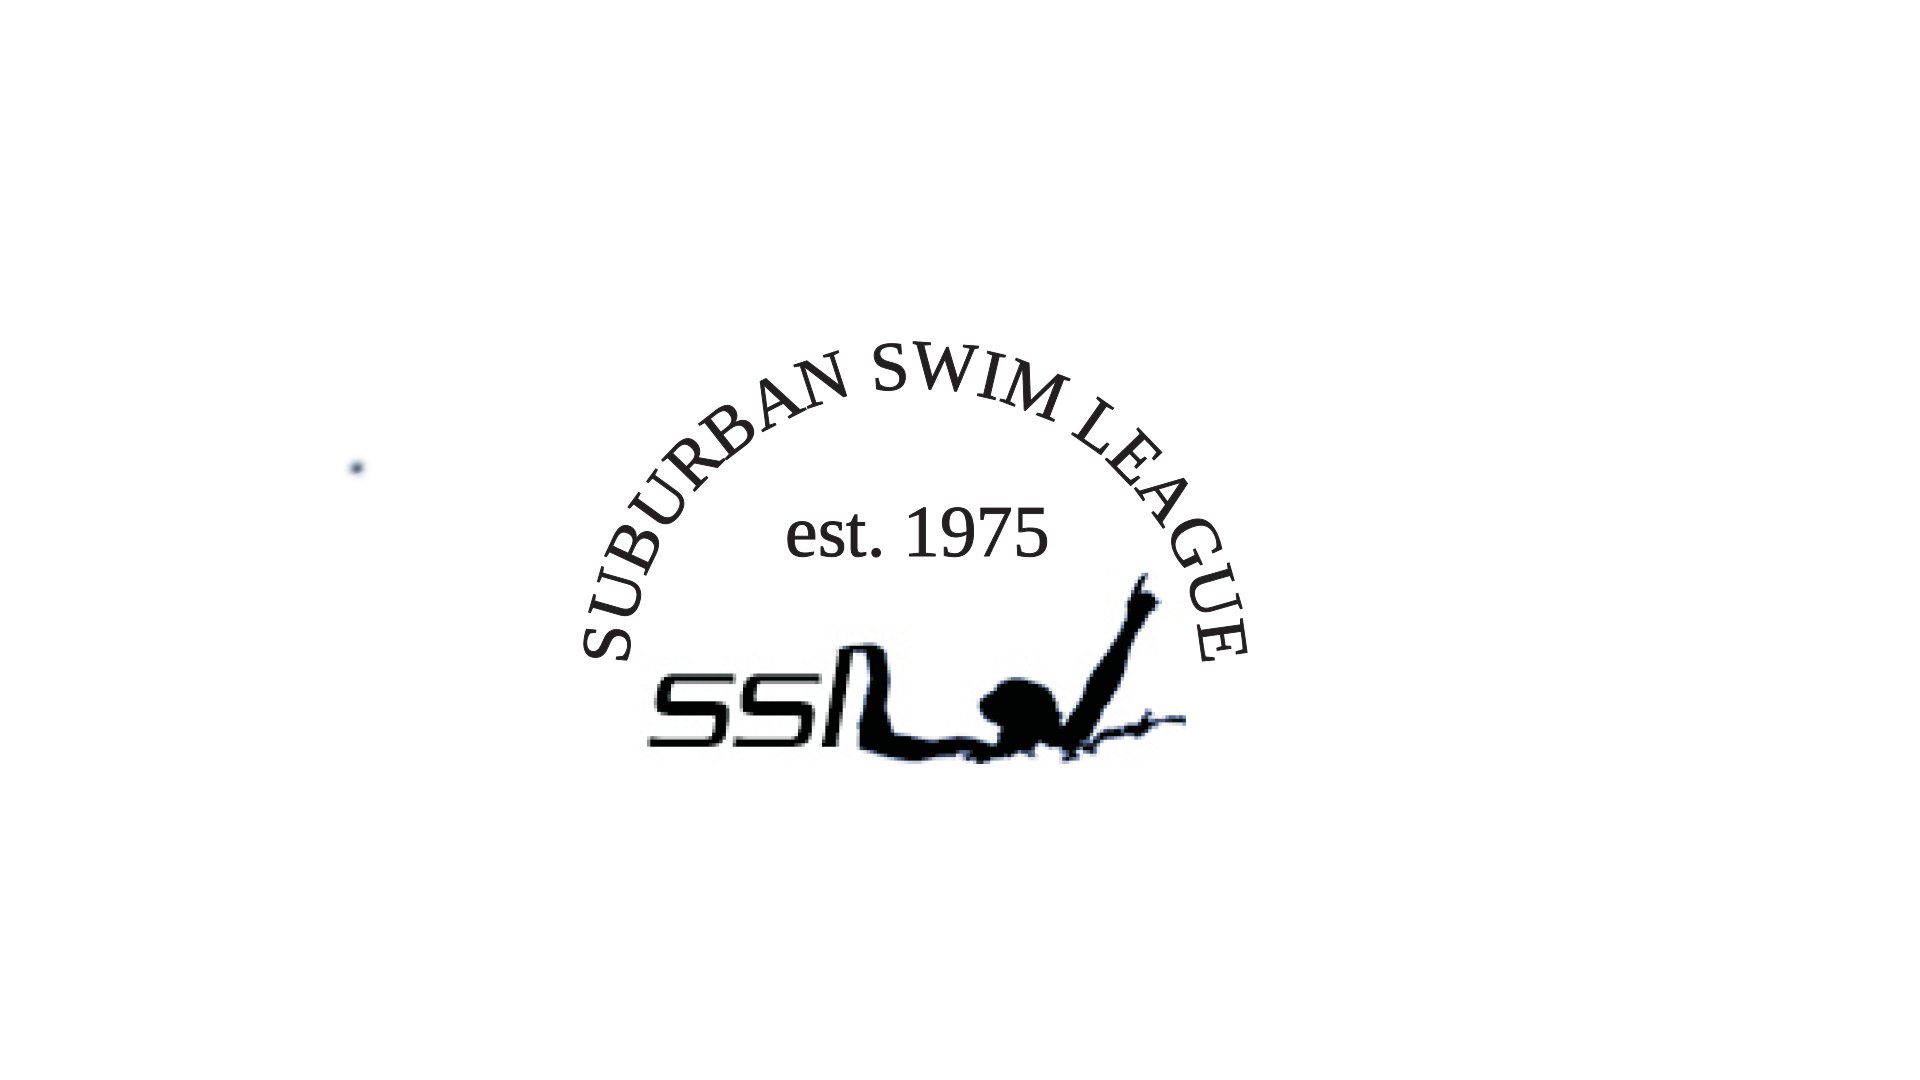 Suburban Swim League Swimming - A Champs Meet - 2019 - Afternoon Session - Active Image Media